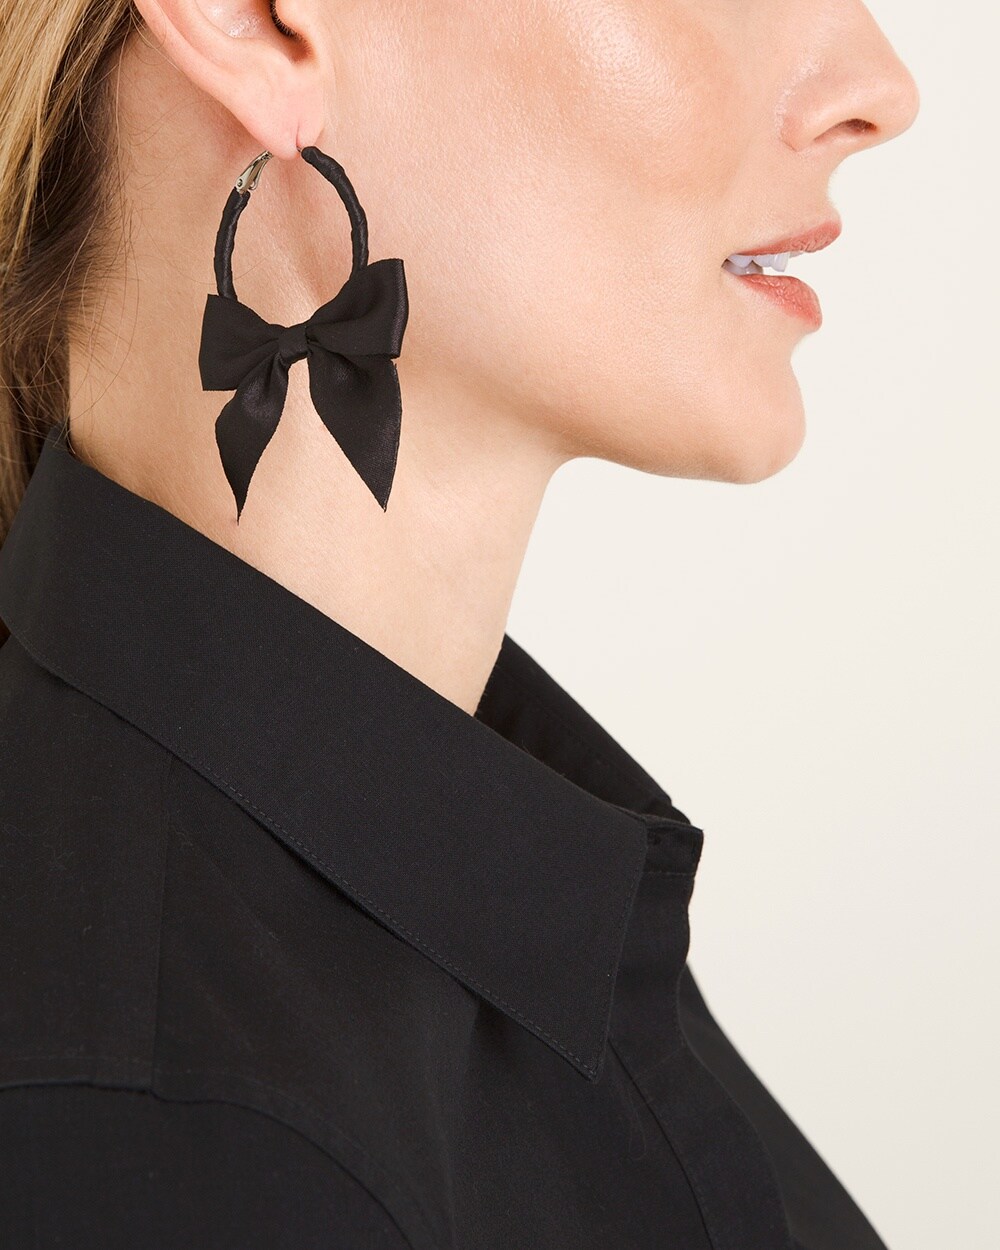 Handcrafted black bow earrings